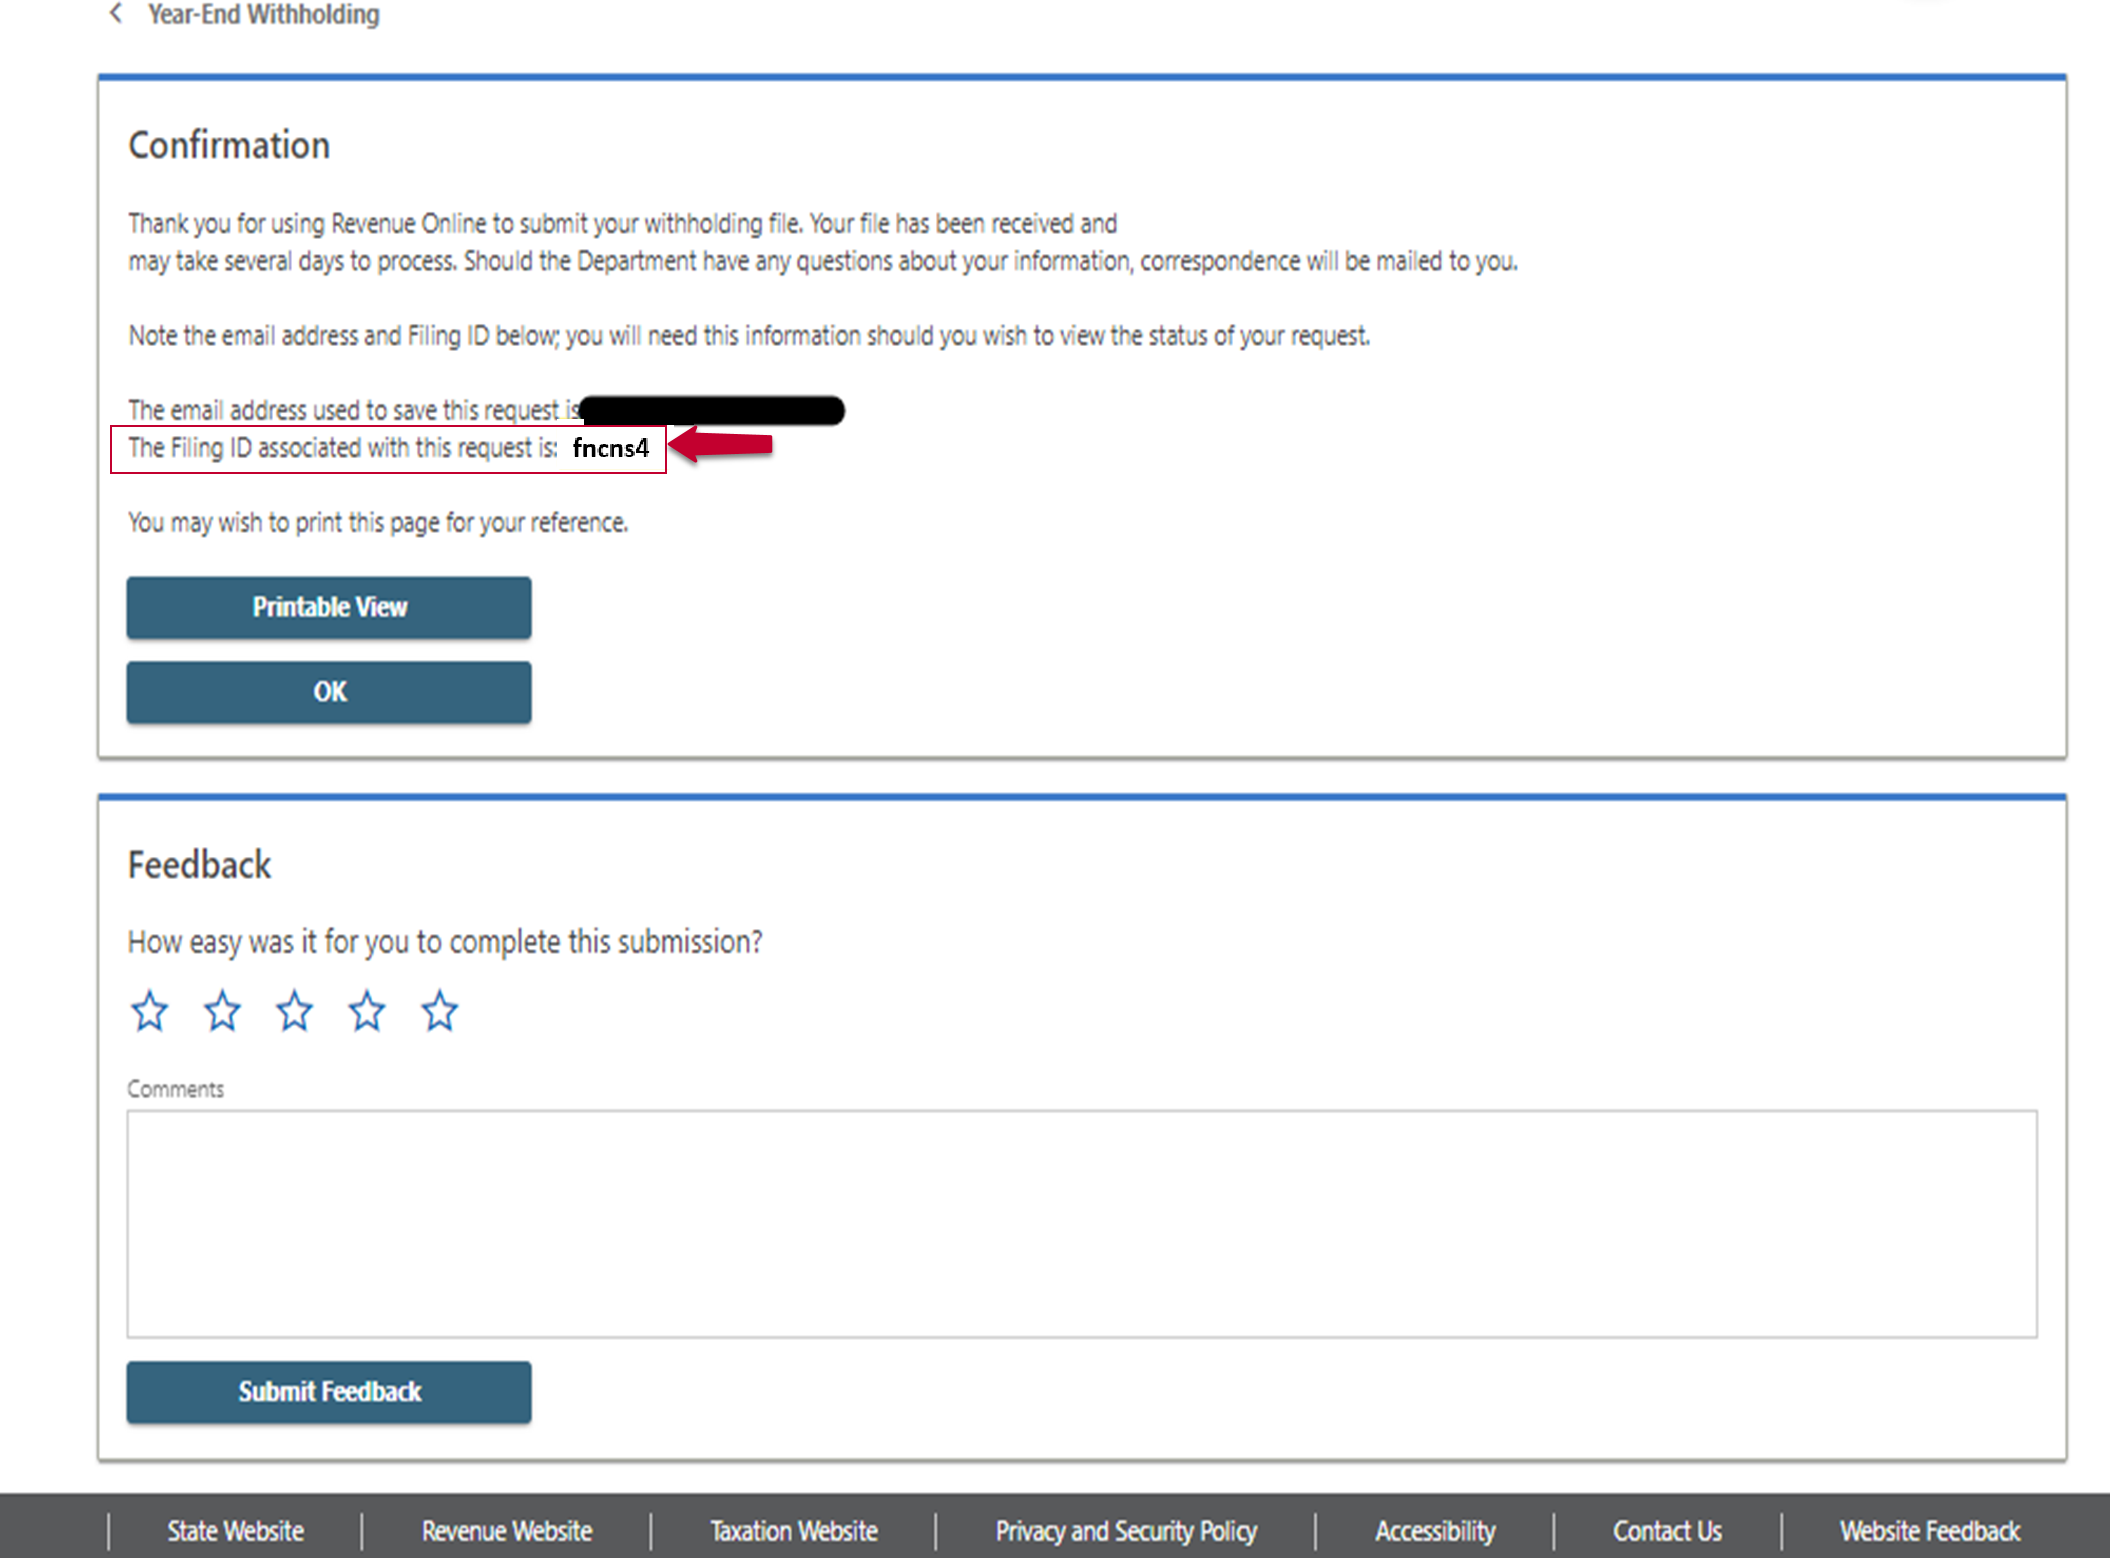 Screenshot of Confirmation and Filing ID of Withholding File Upload in Revenue Online